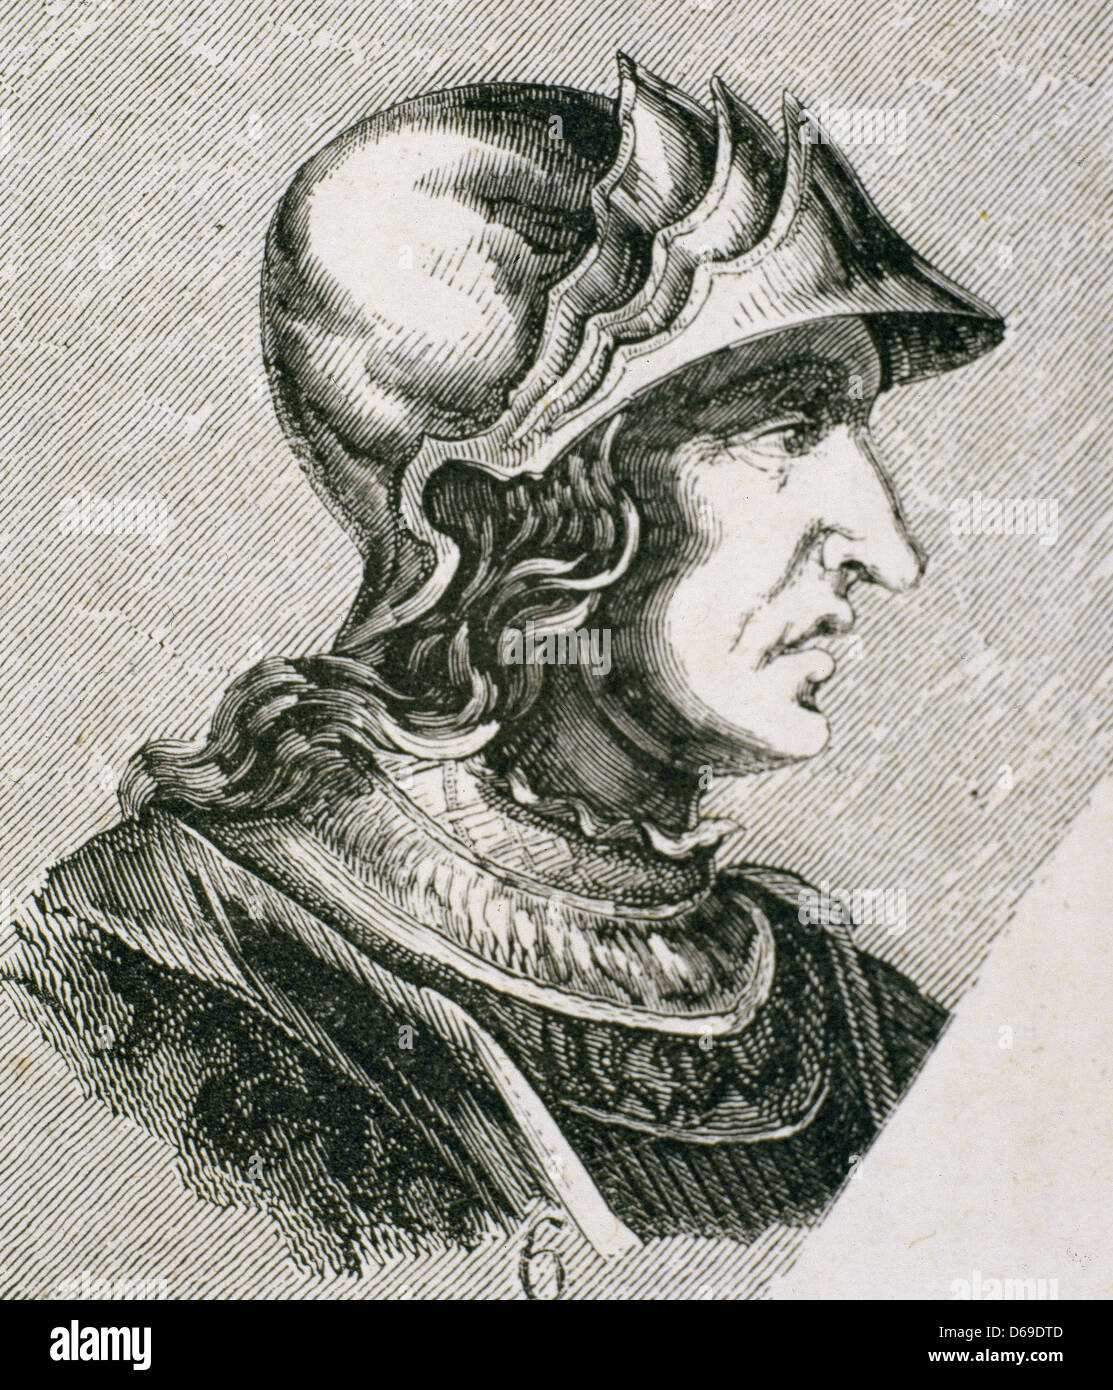 Theodoric II. (died 466). Was the eight of Visigoths from 543 to 466. Engraving. Stock Photo